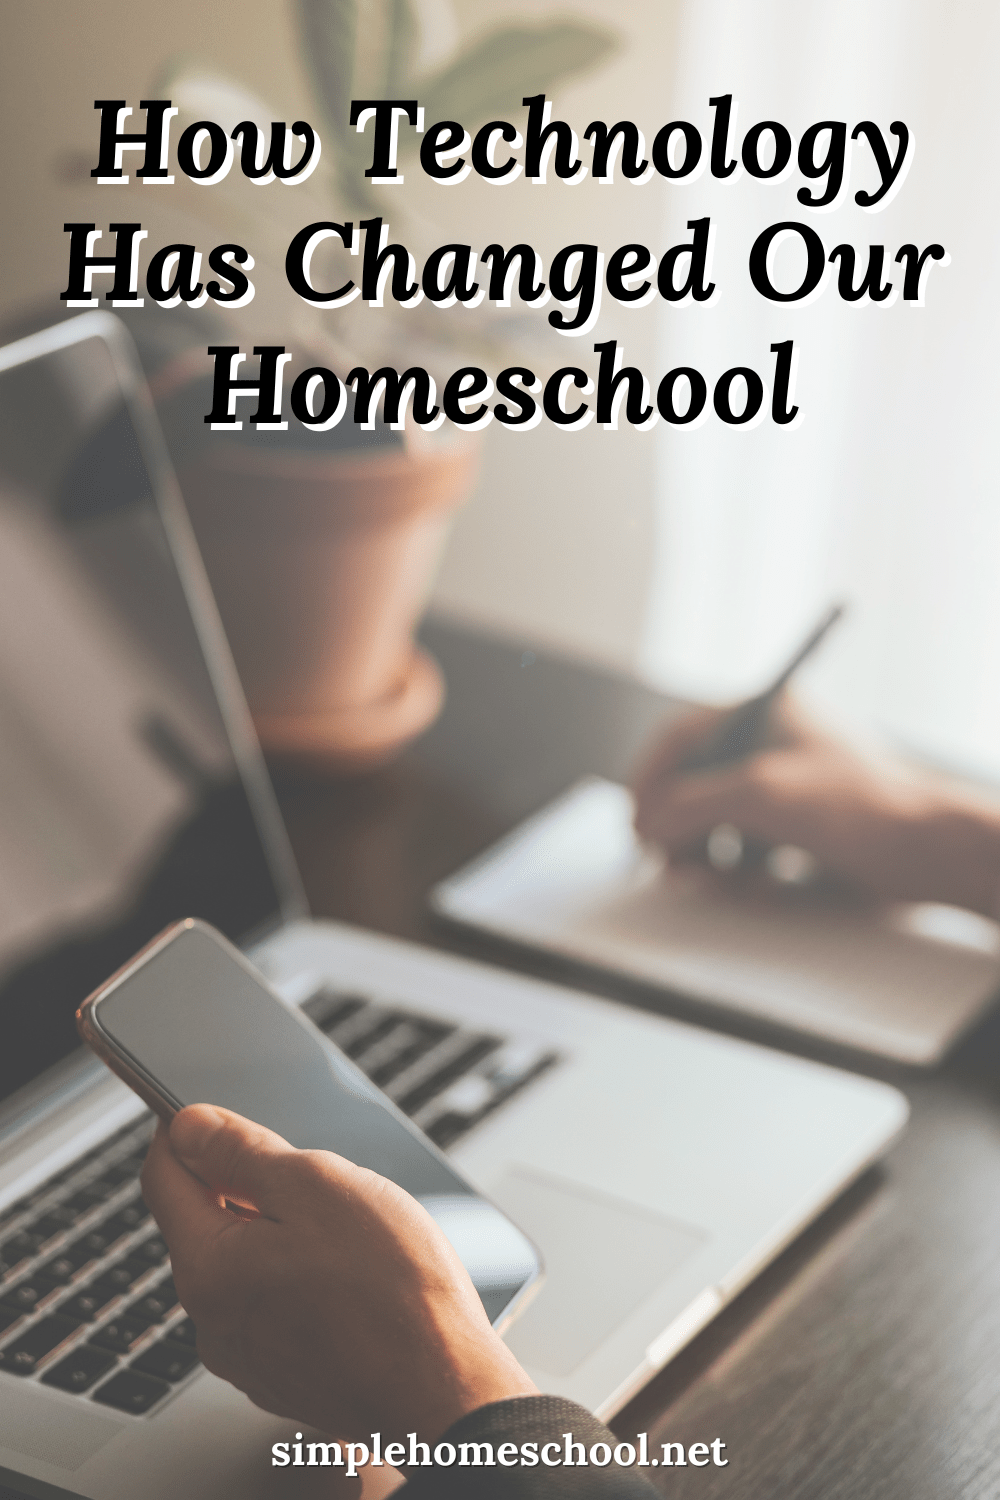 Technology in our homeschool